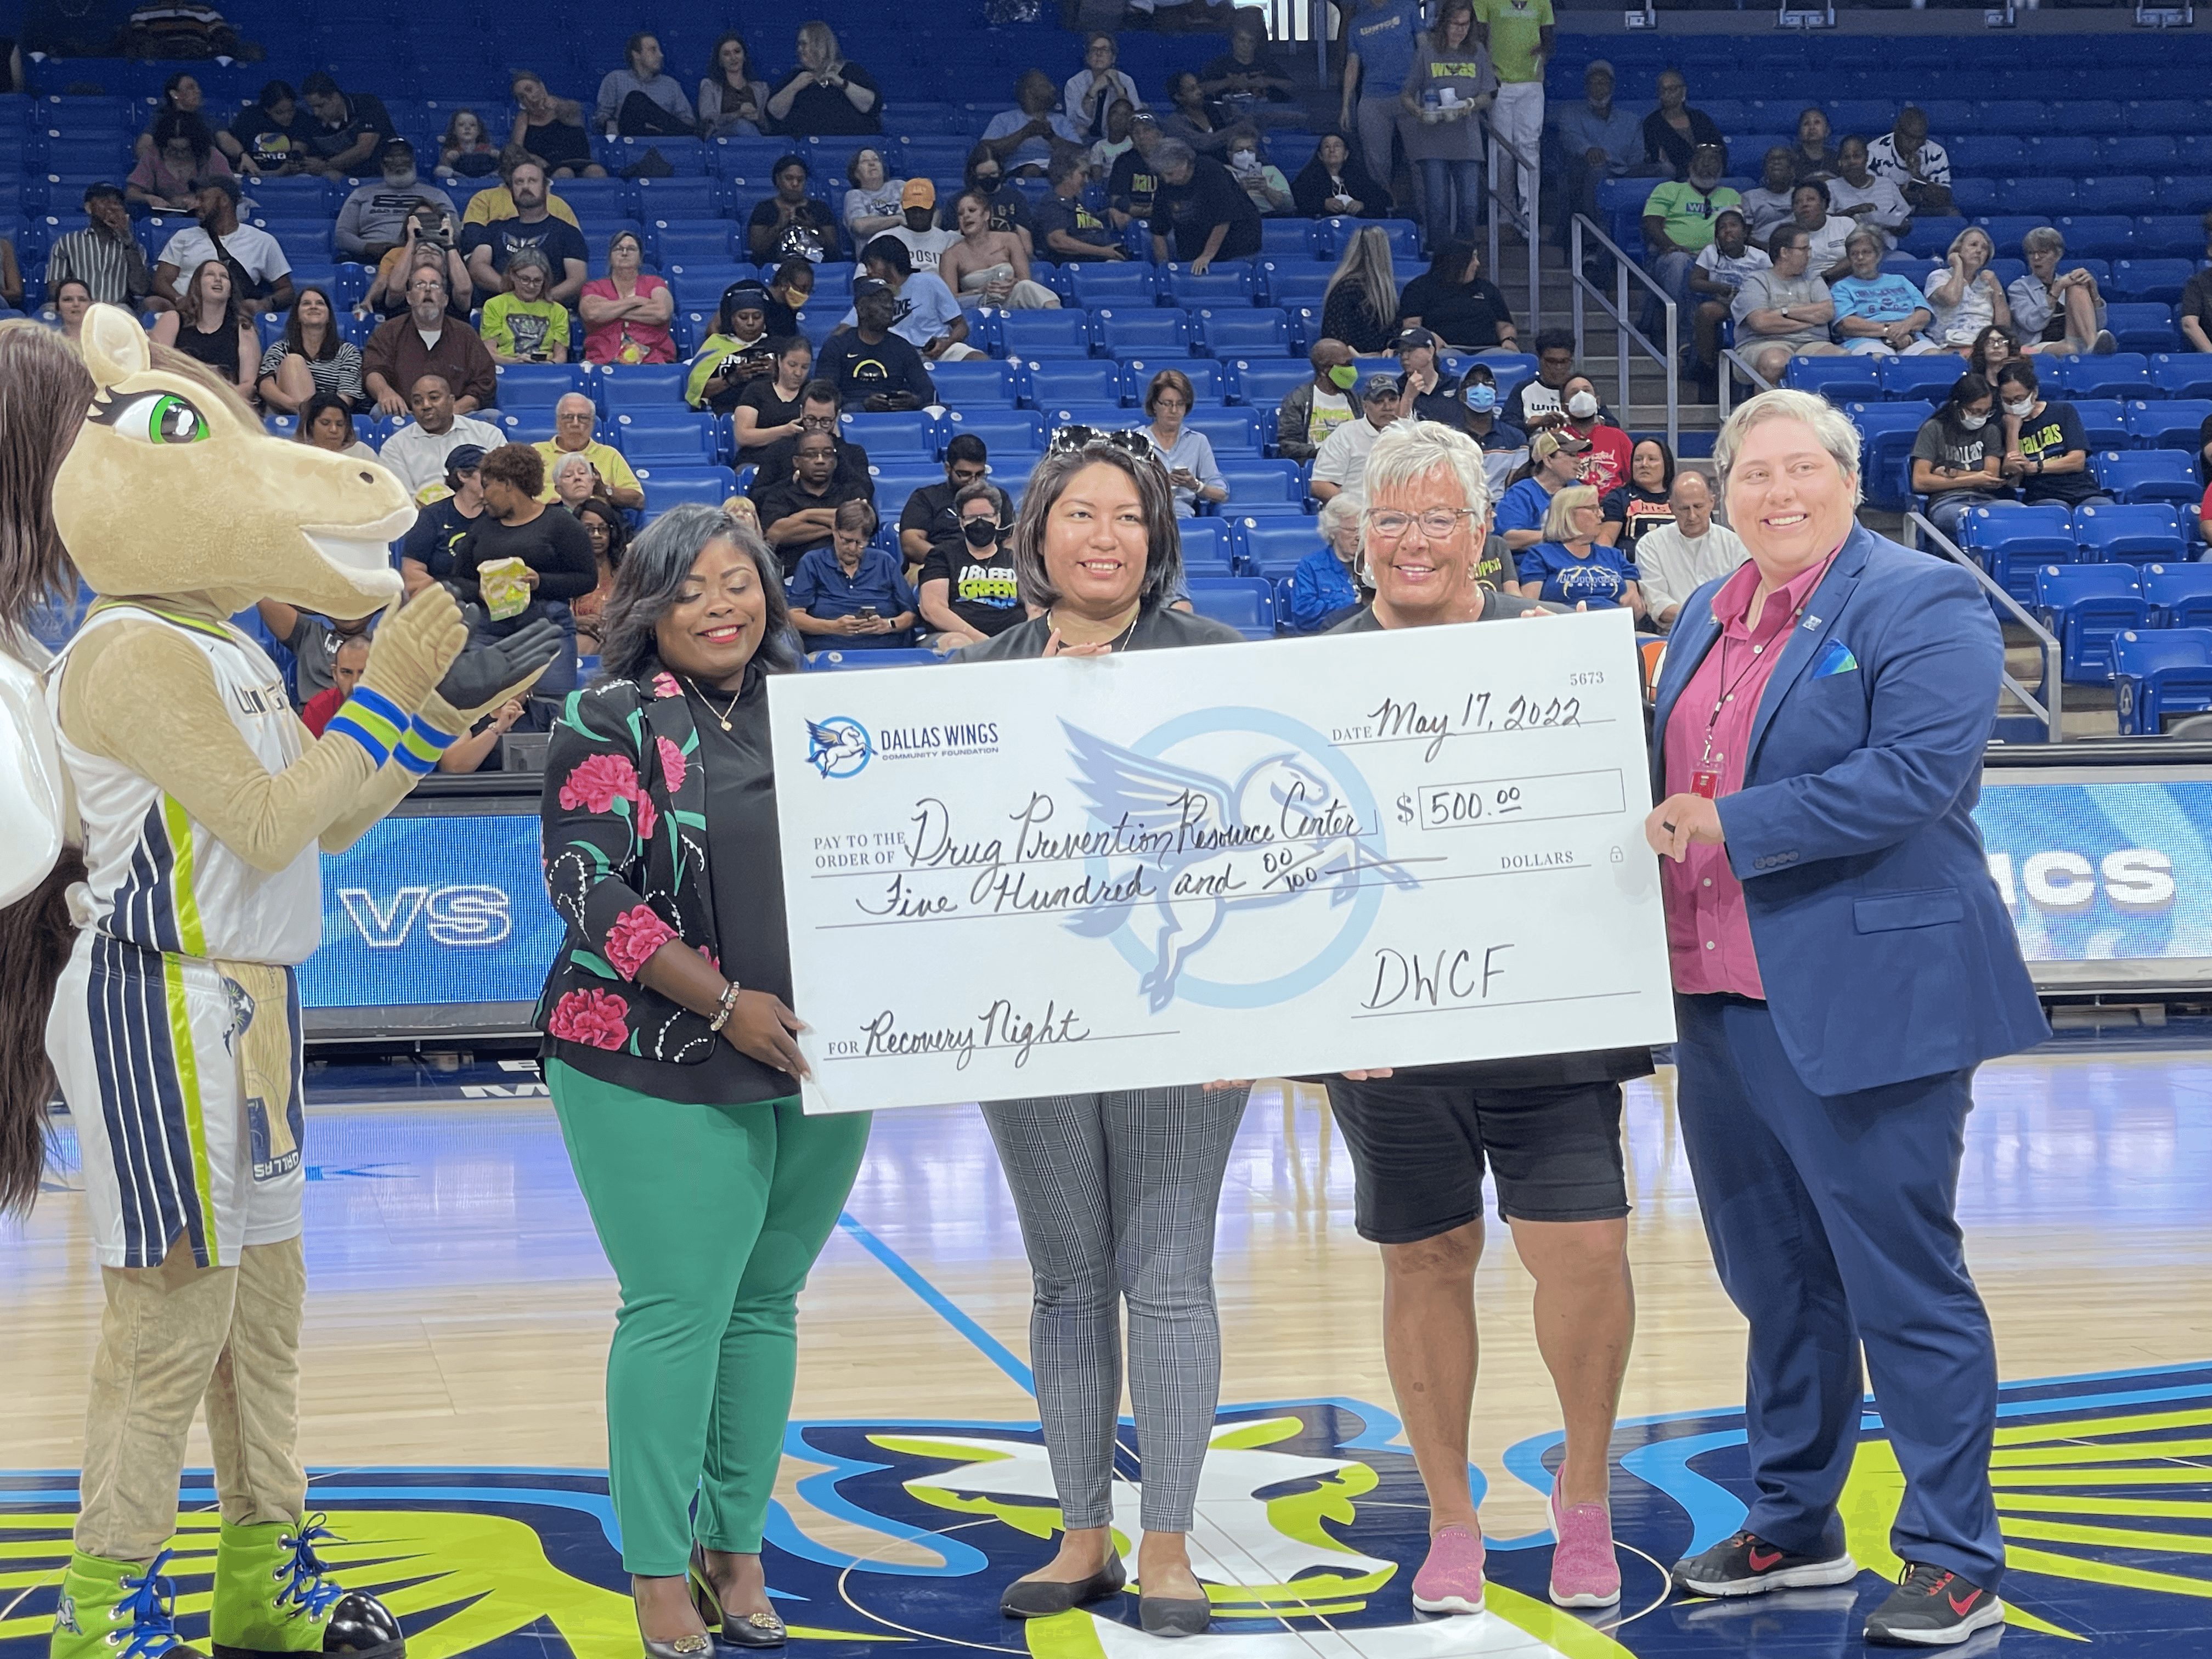 Dallas Wings Awards DPR With a Giant Check!